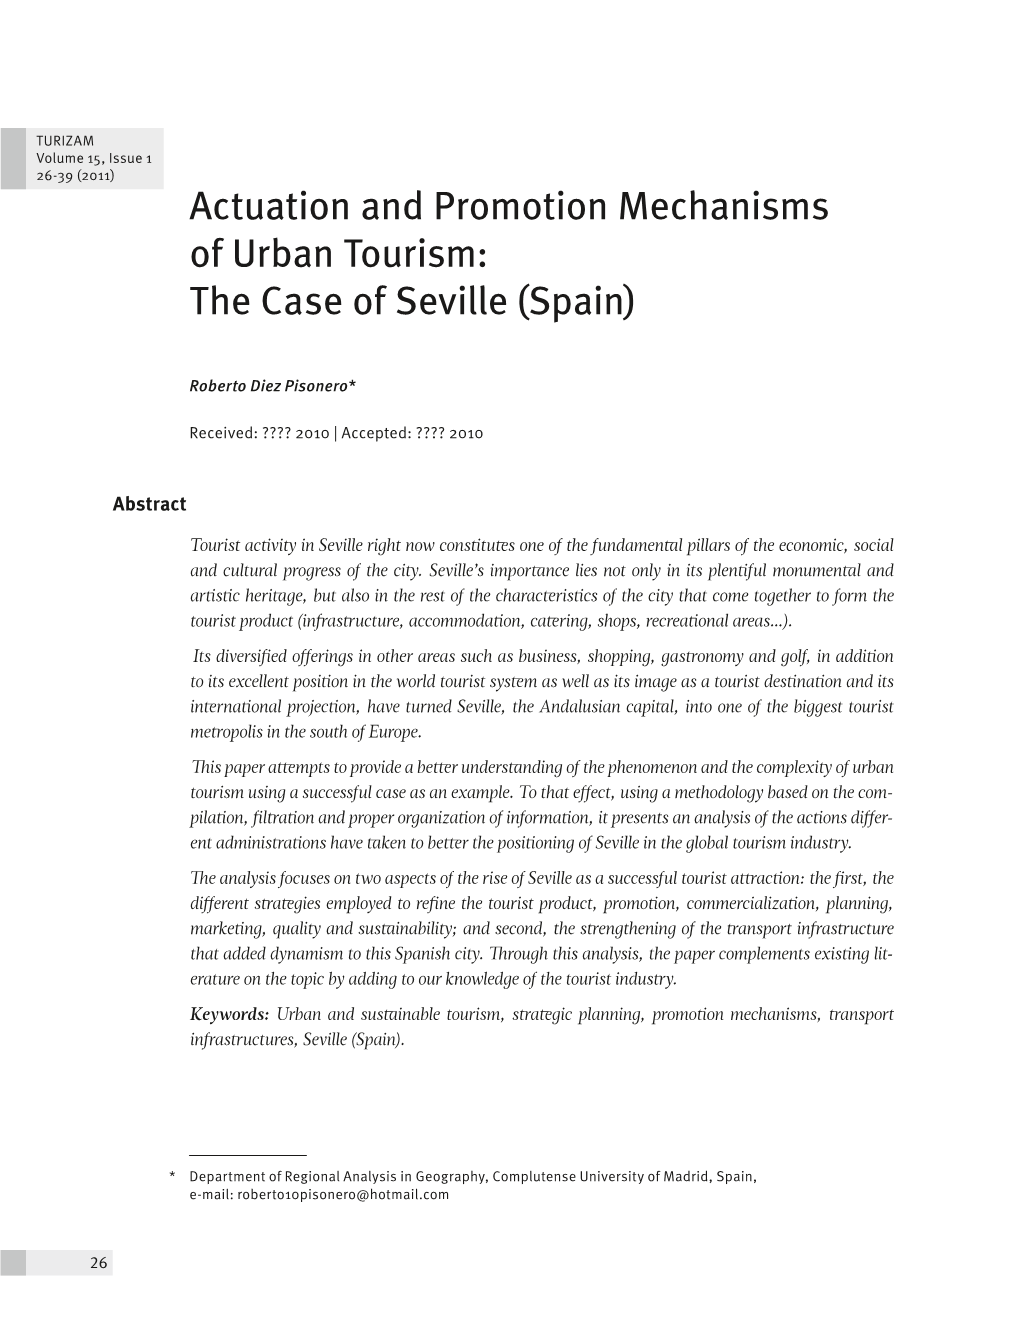 Actuation and Promotion Mechanisms of Urban Tourism: the Case of Seville (Spain)